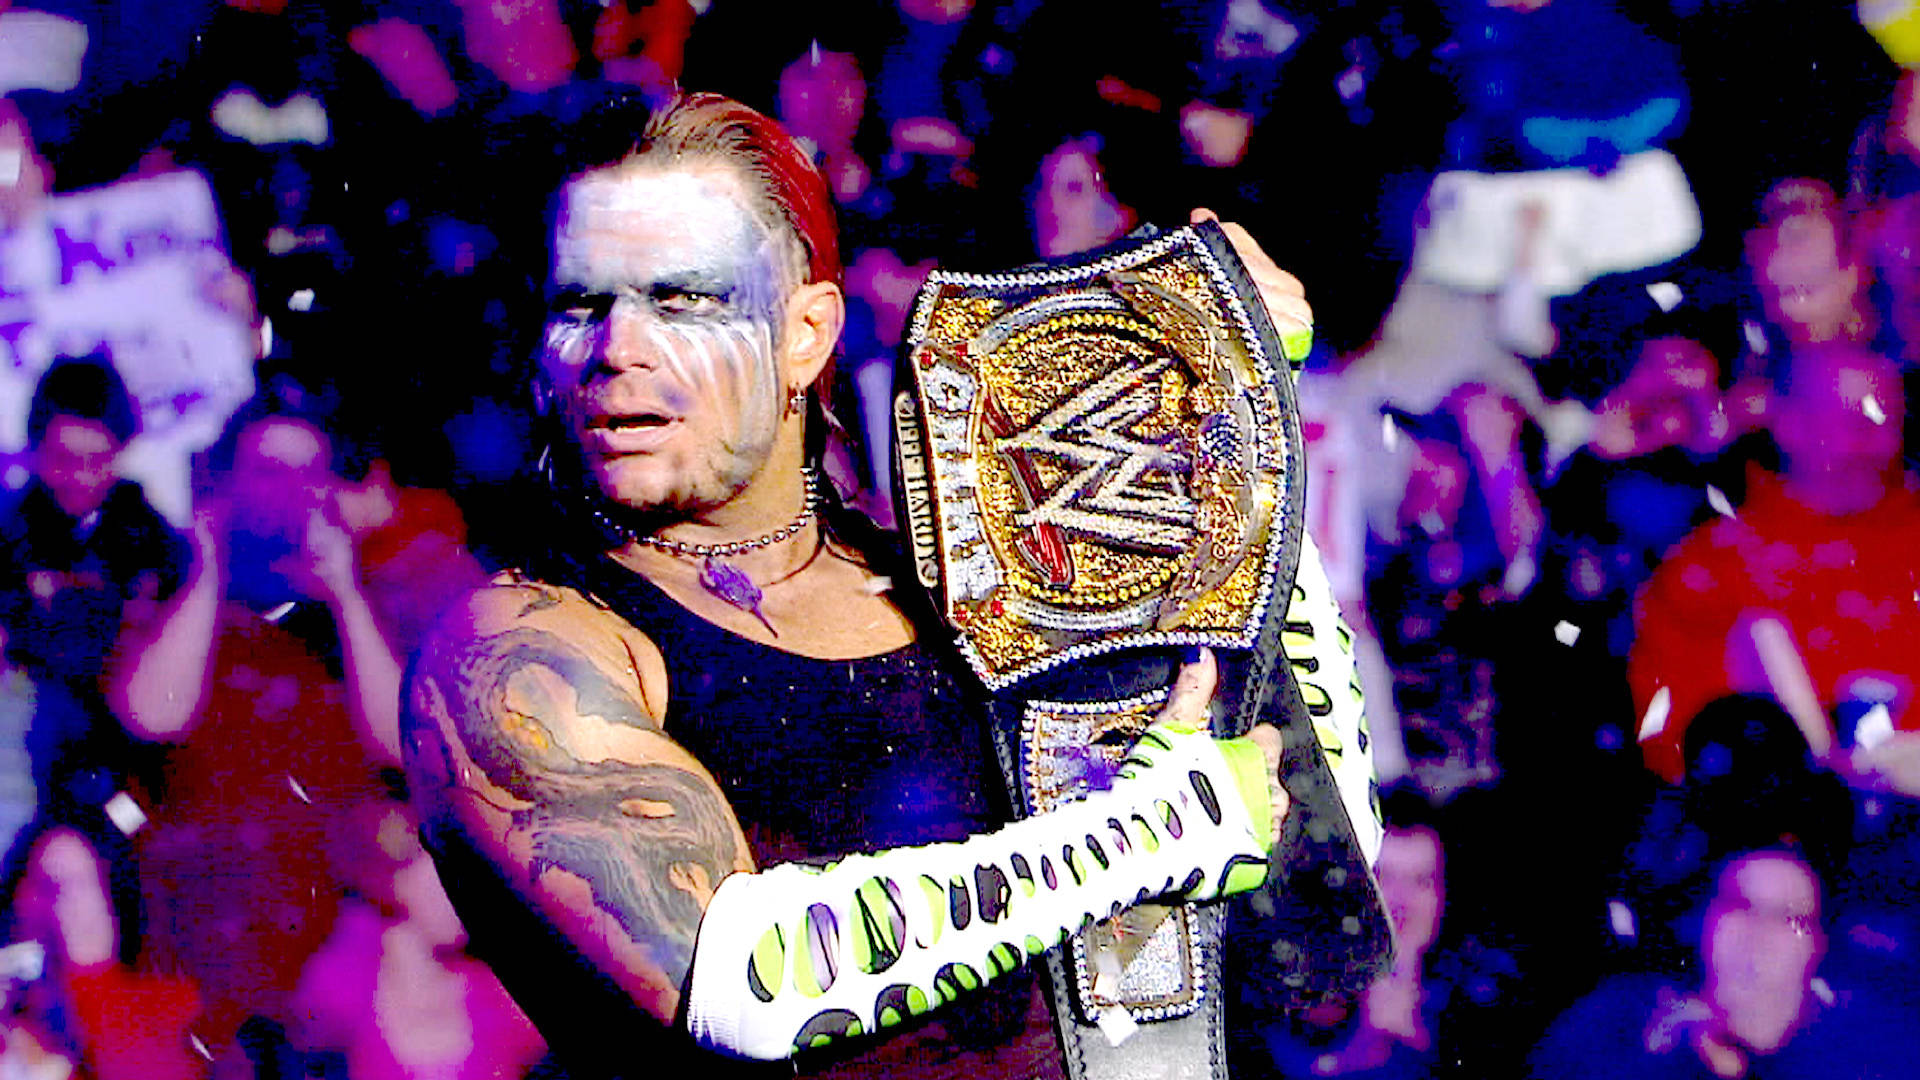 Jeff Hardy kicks off his first WWE Championship reign SmackDown, Dec